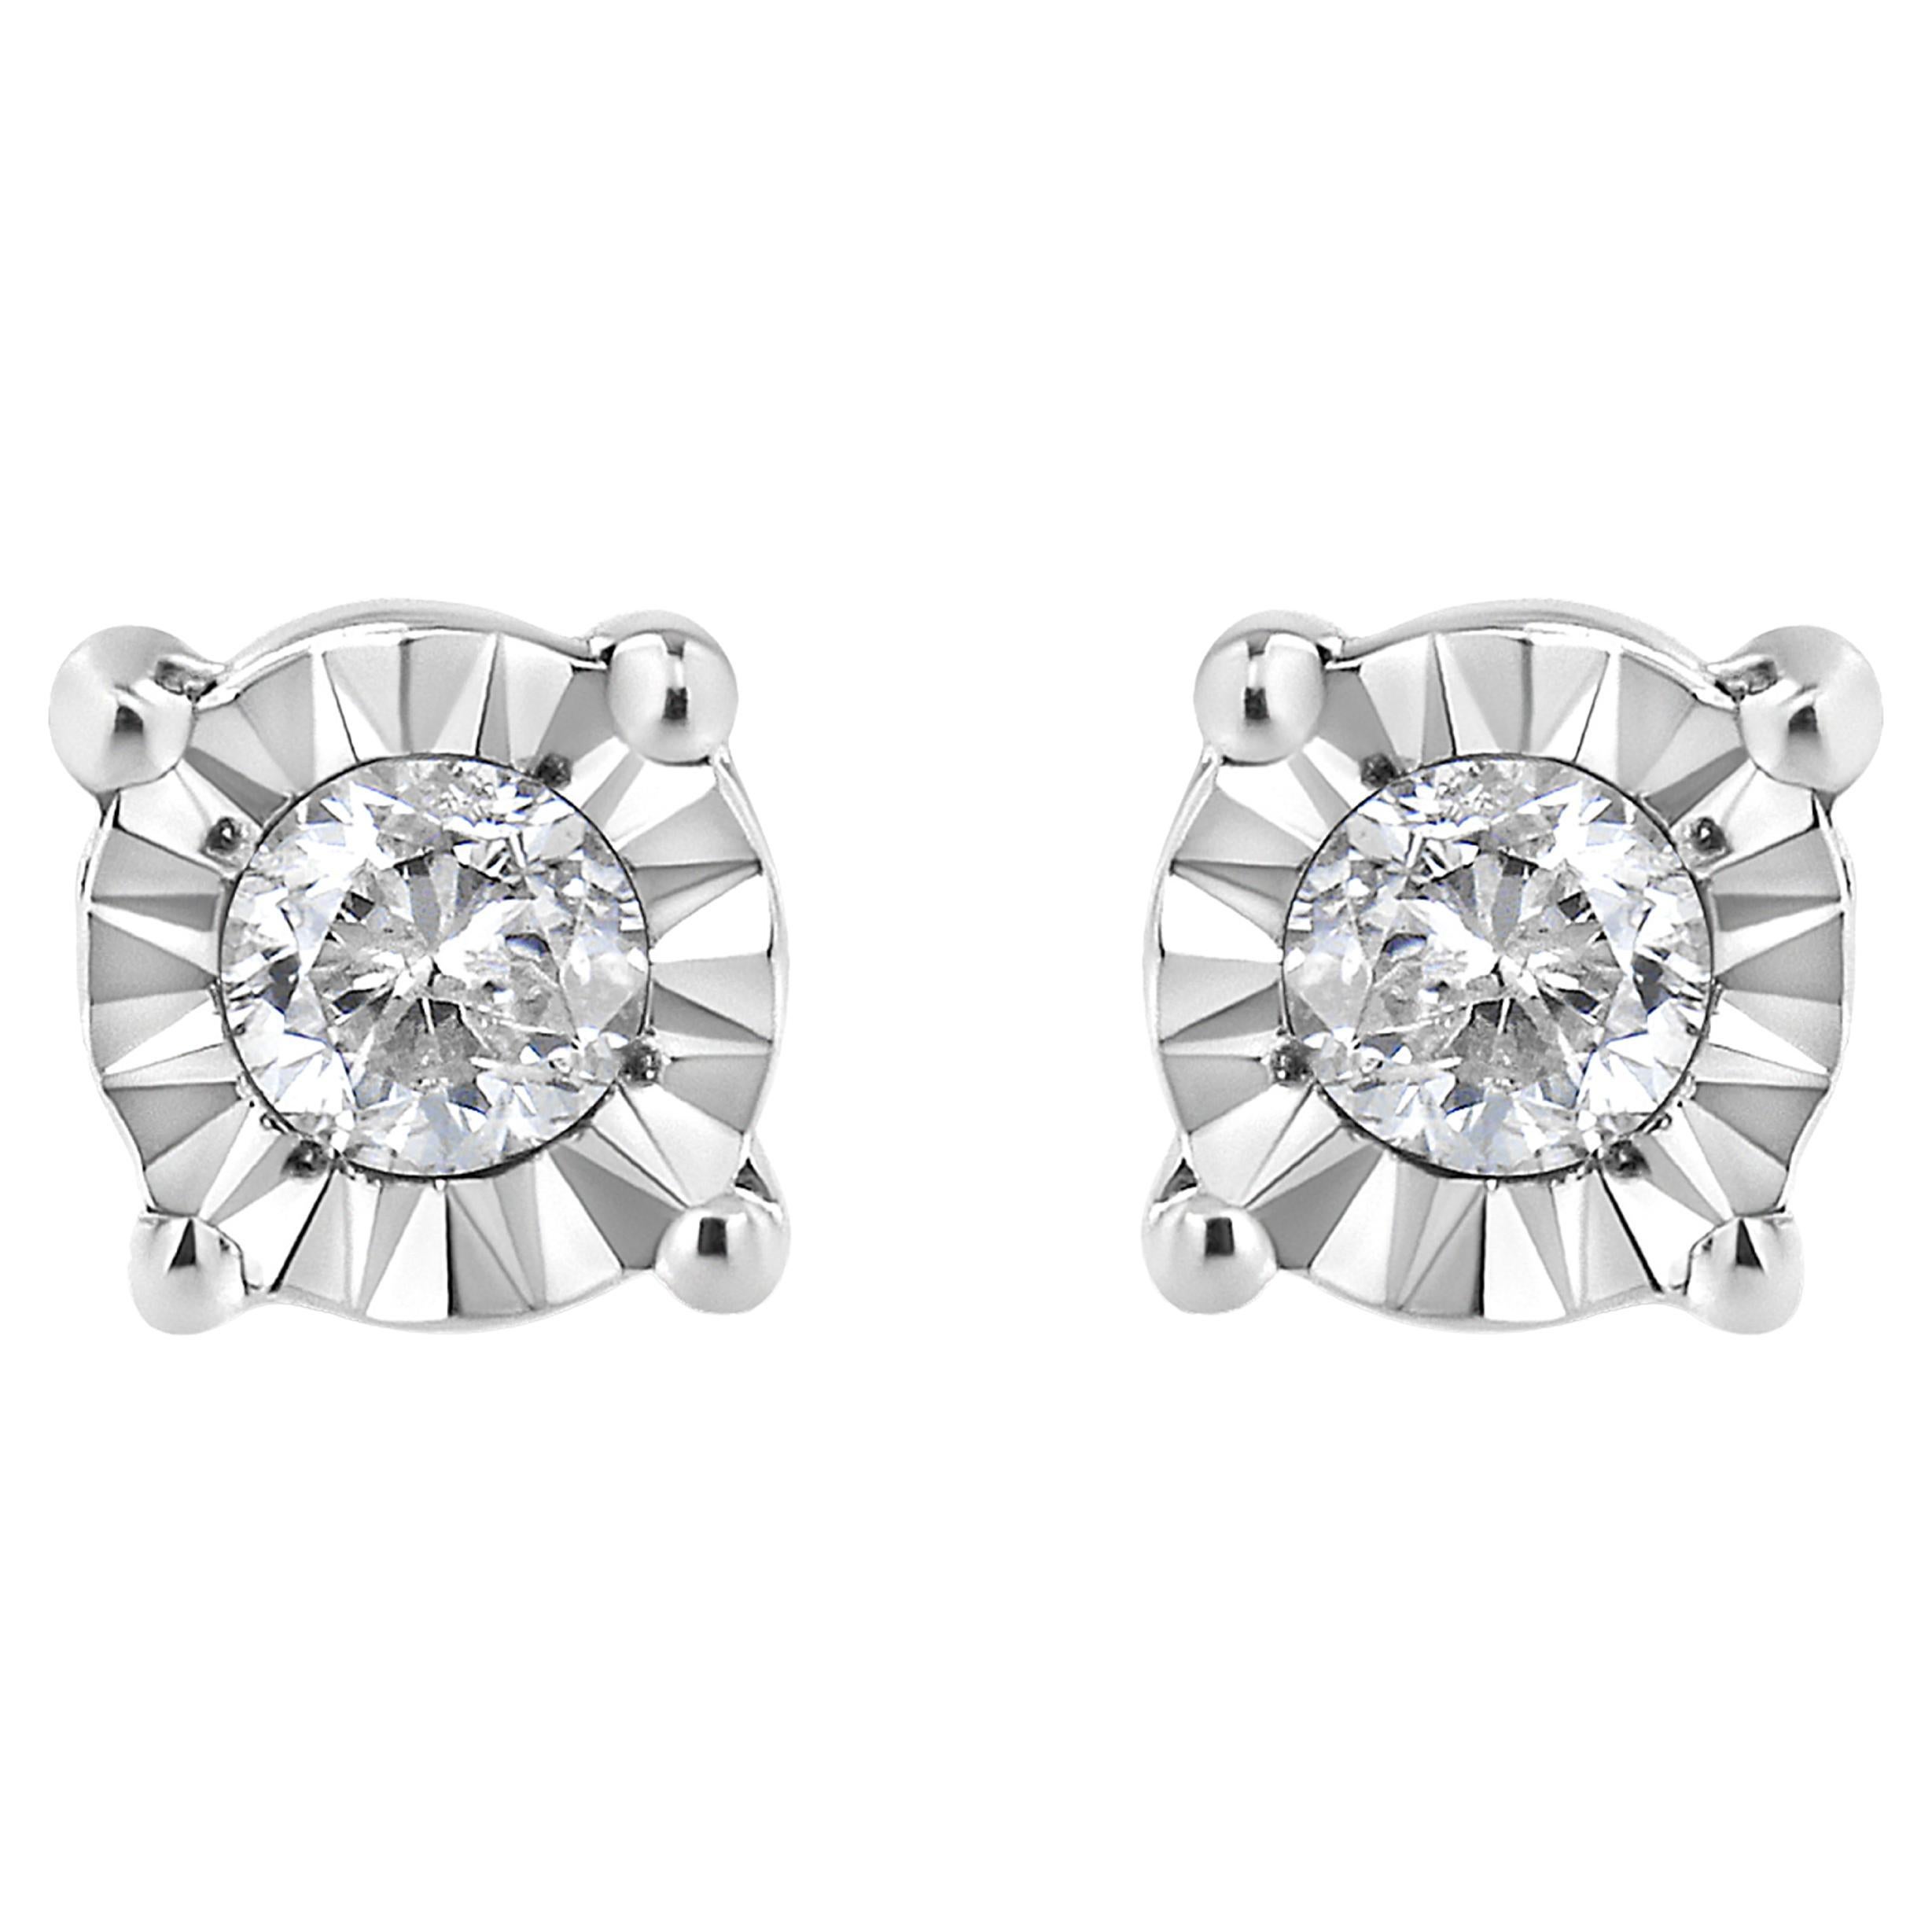 .925 Sterling Silver 1/10 Carat Round-Cut Diamond Miracle-Plated Stud Earrings